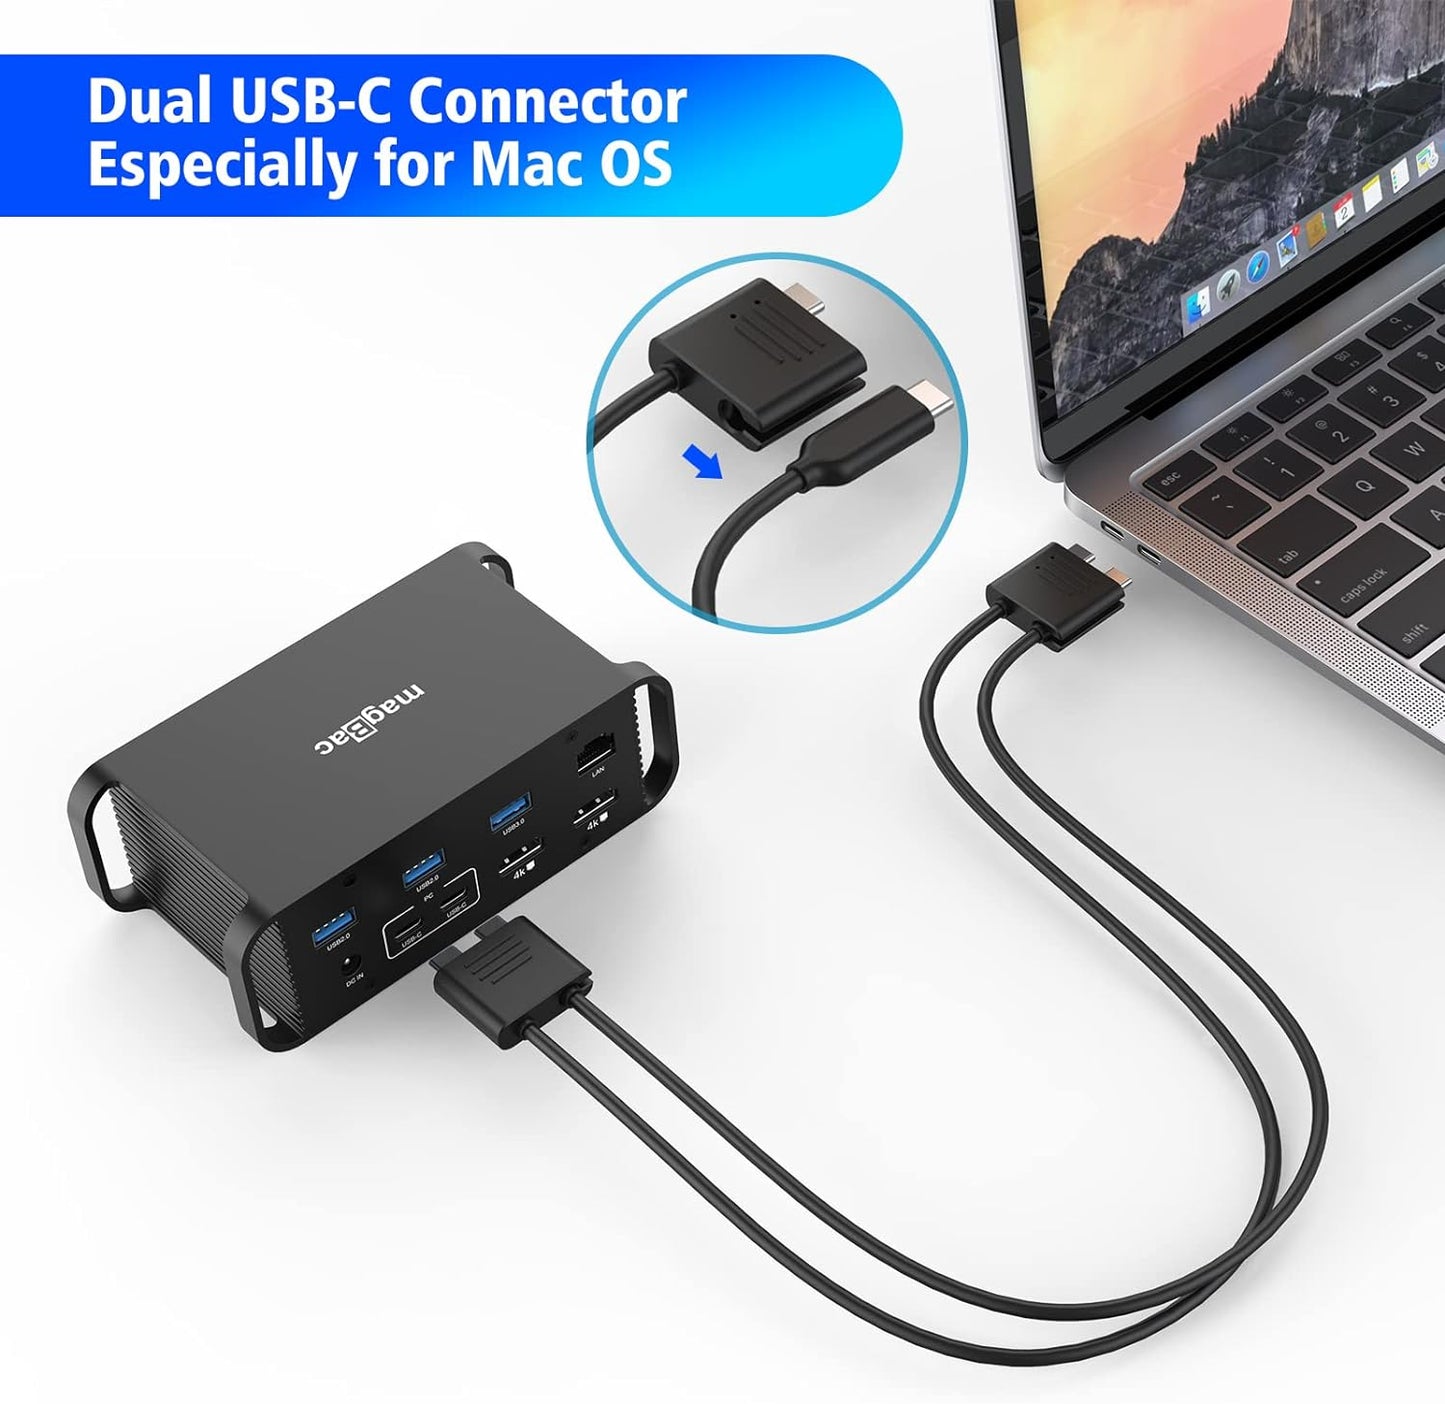 MacBook Laptop Docking Station Dual Monitor, 14 in 2 USB C Dock with 100W AC Power Adapter, Two 4K HDMI, 4 USB A, USB C PD 18W Charger, 3.5mm Audio, SD Slot for MacBook Pro/Air, with Ethernet